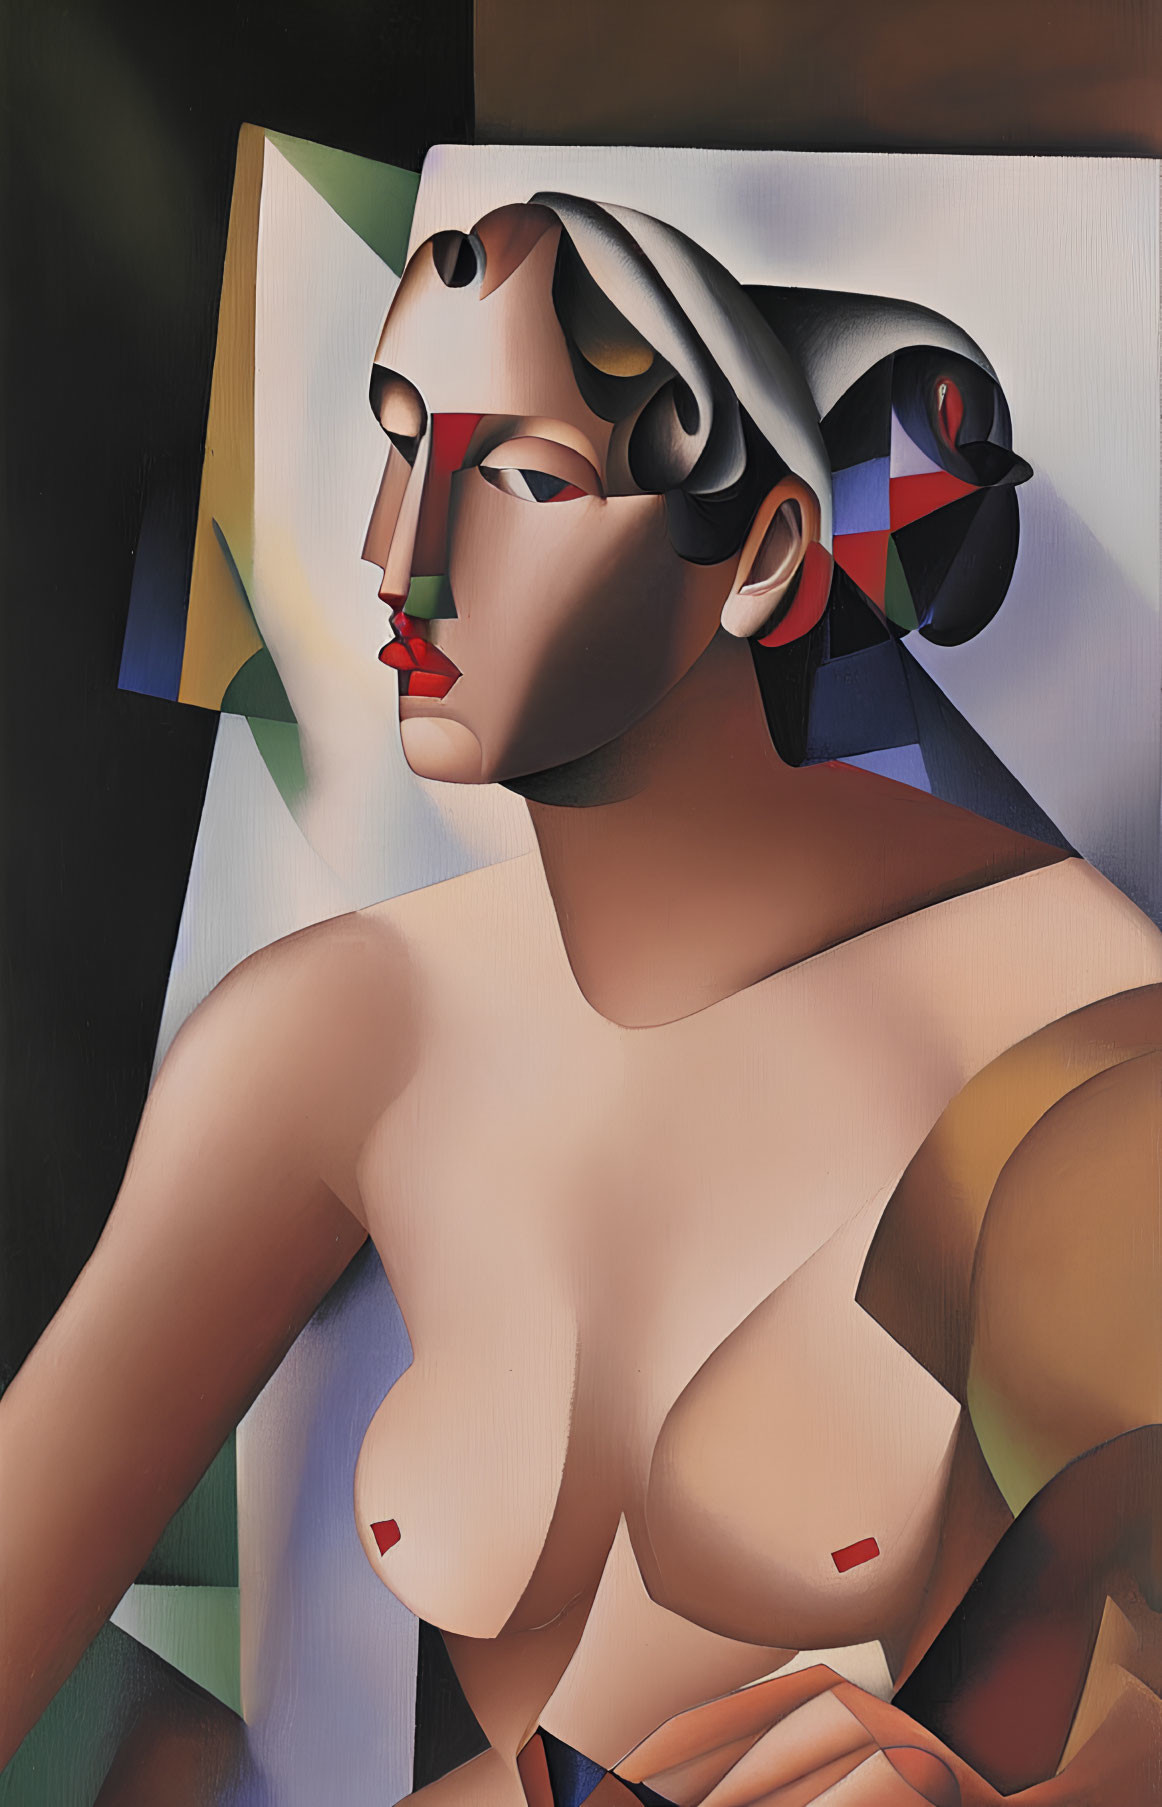 Abstract Cubist Portrait of Woman with Geometric Shapes and Contrasting Colors